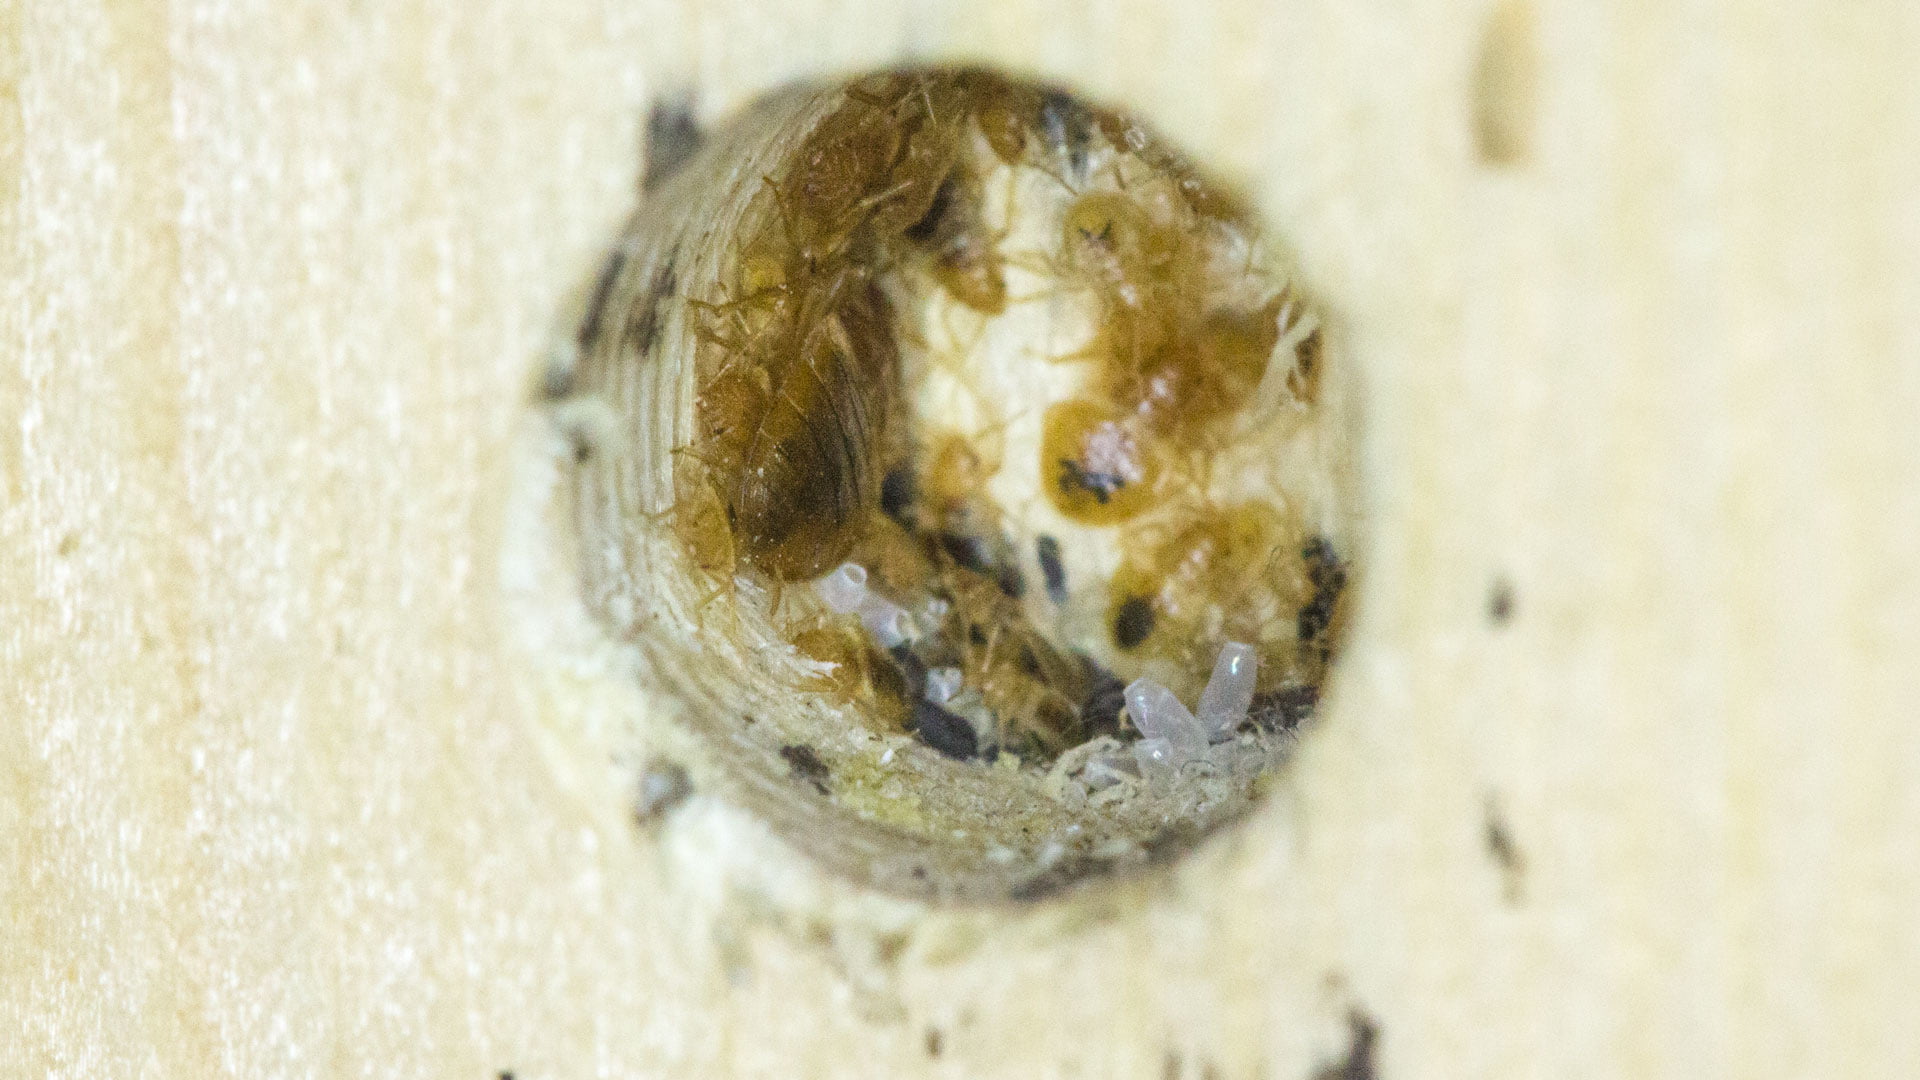 Bed Bugs Nest in a Small hole in bed frame